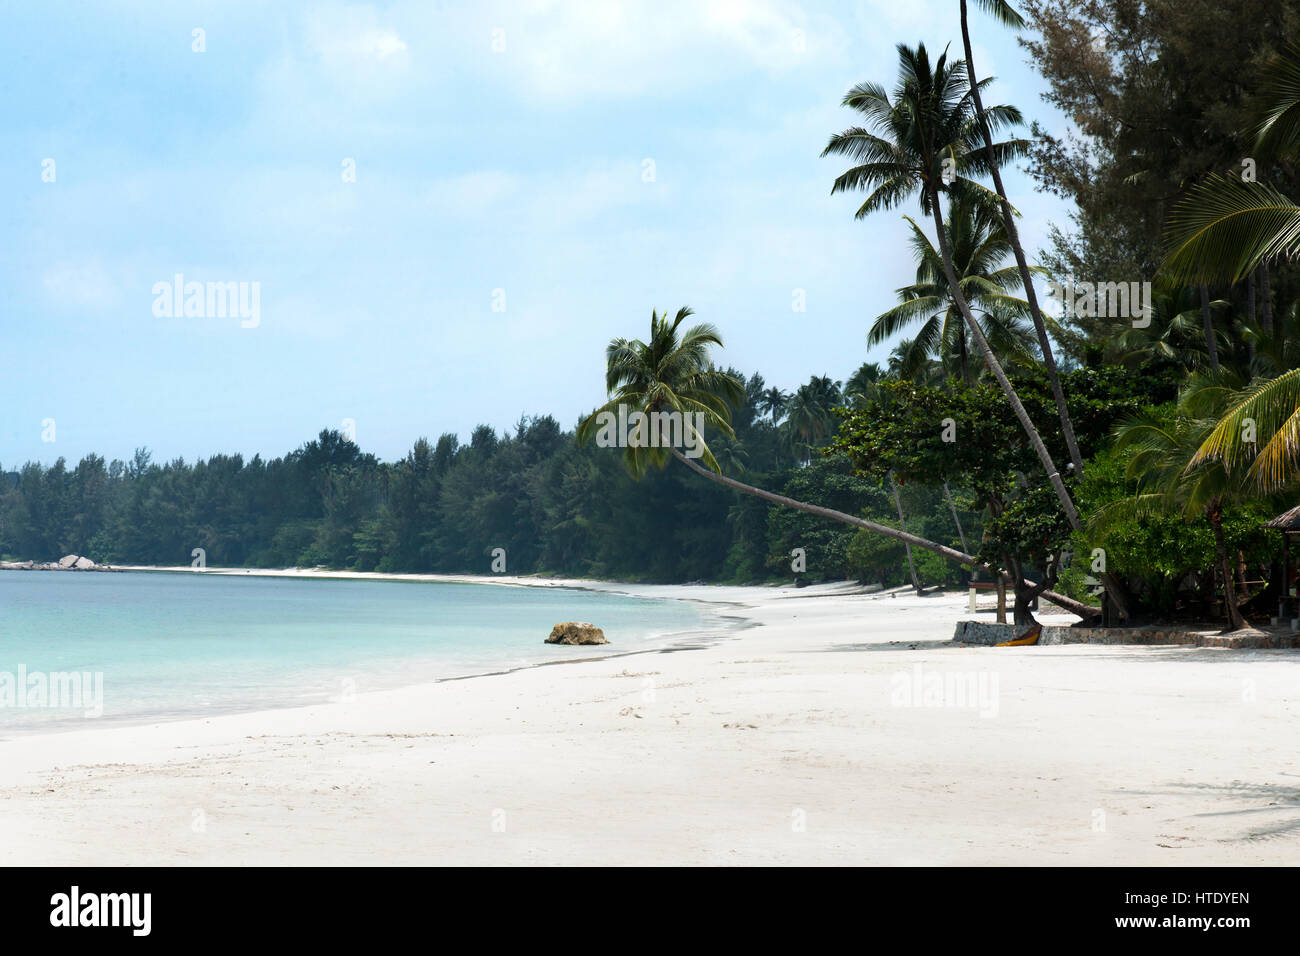 Tropical white sand beach and palm trees stretching out towards the blue colored ocean in the afternoon at Tanjung Pinang on Bintan island, Indonesia. Stock Photo